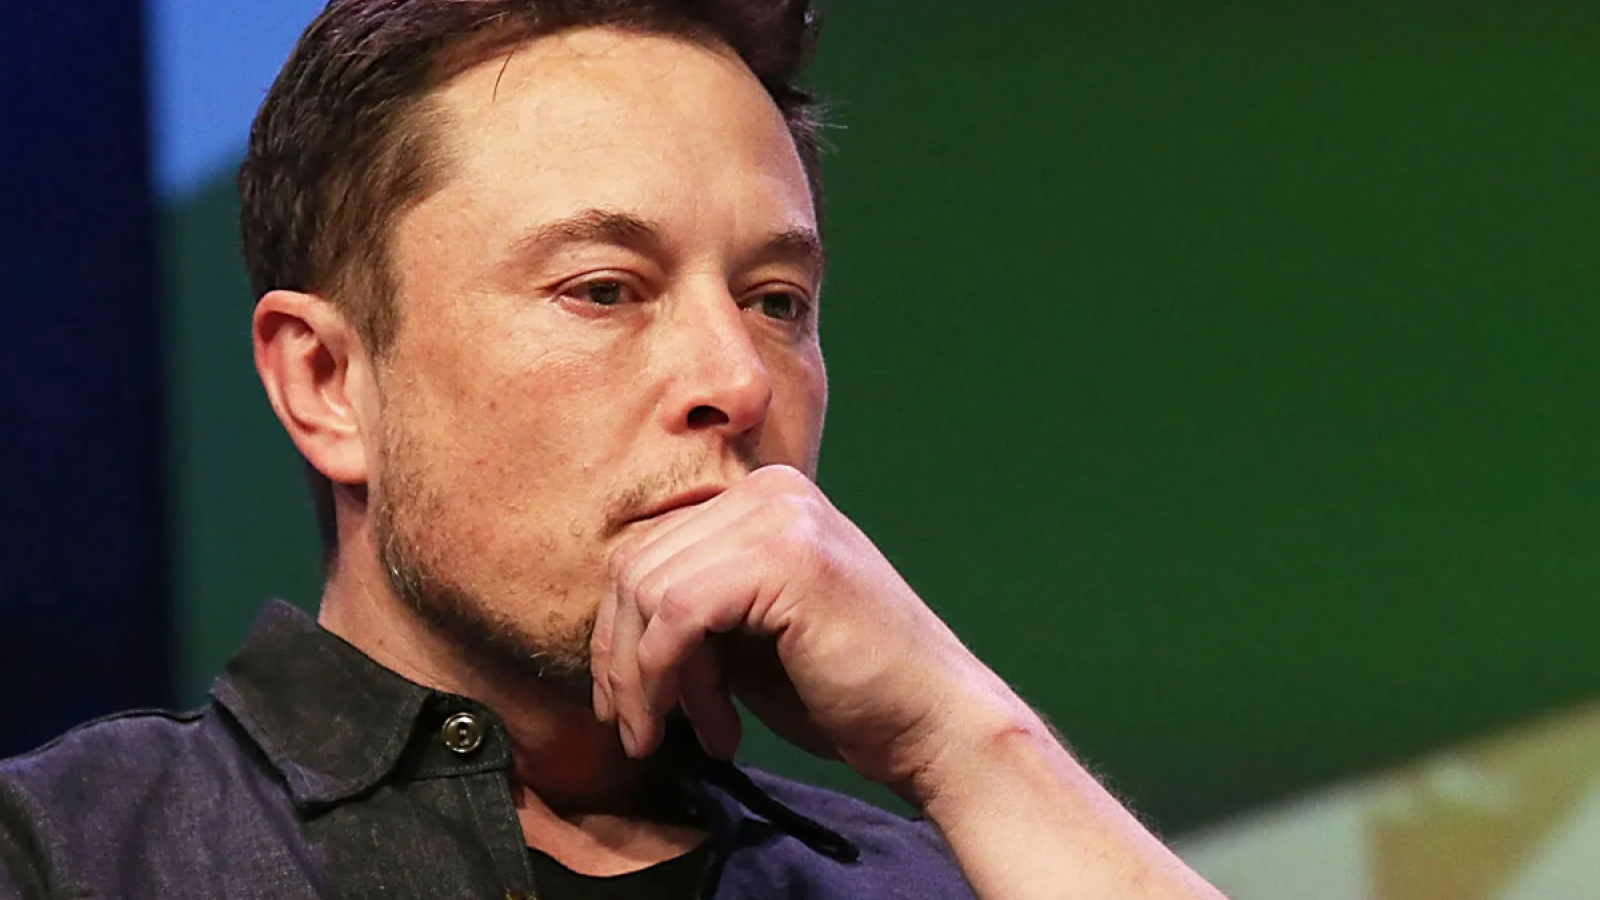 Dogecoin Fan Elon Musk Urges Followers To Invest In Crypto With Caution